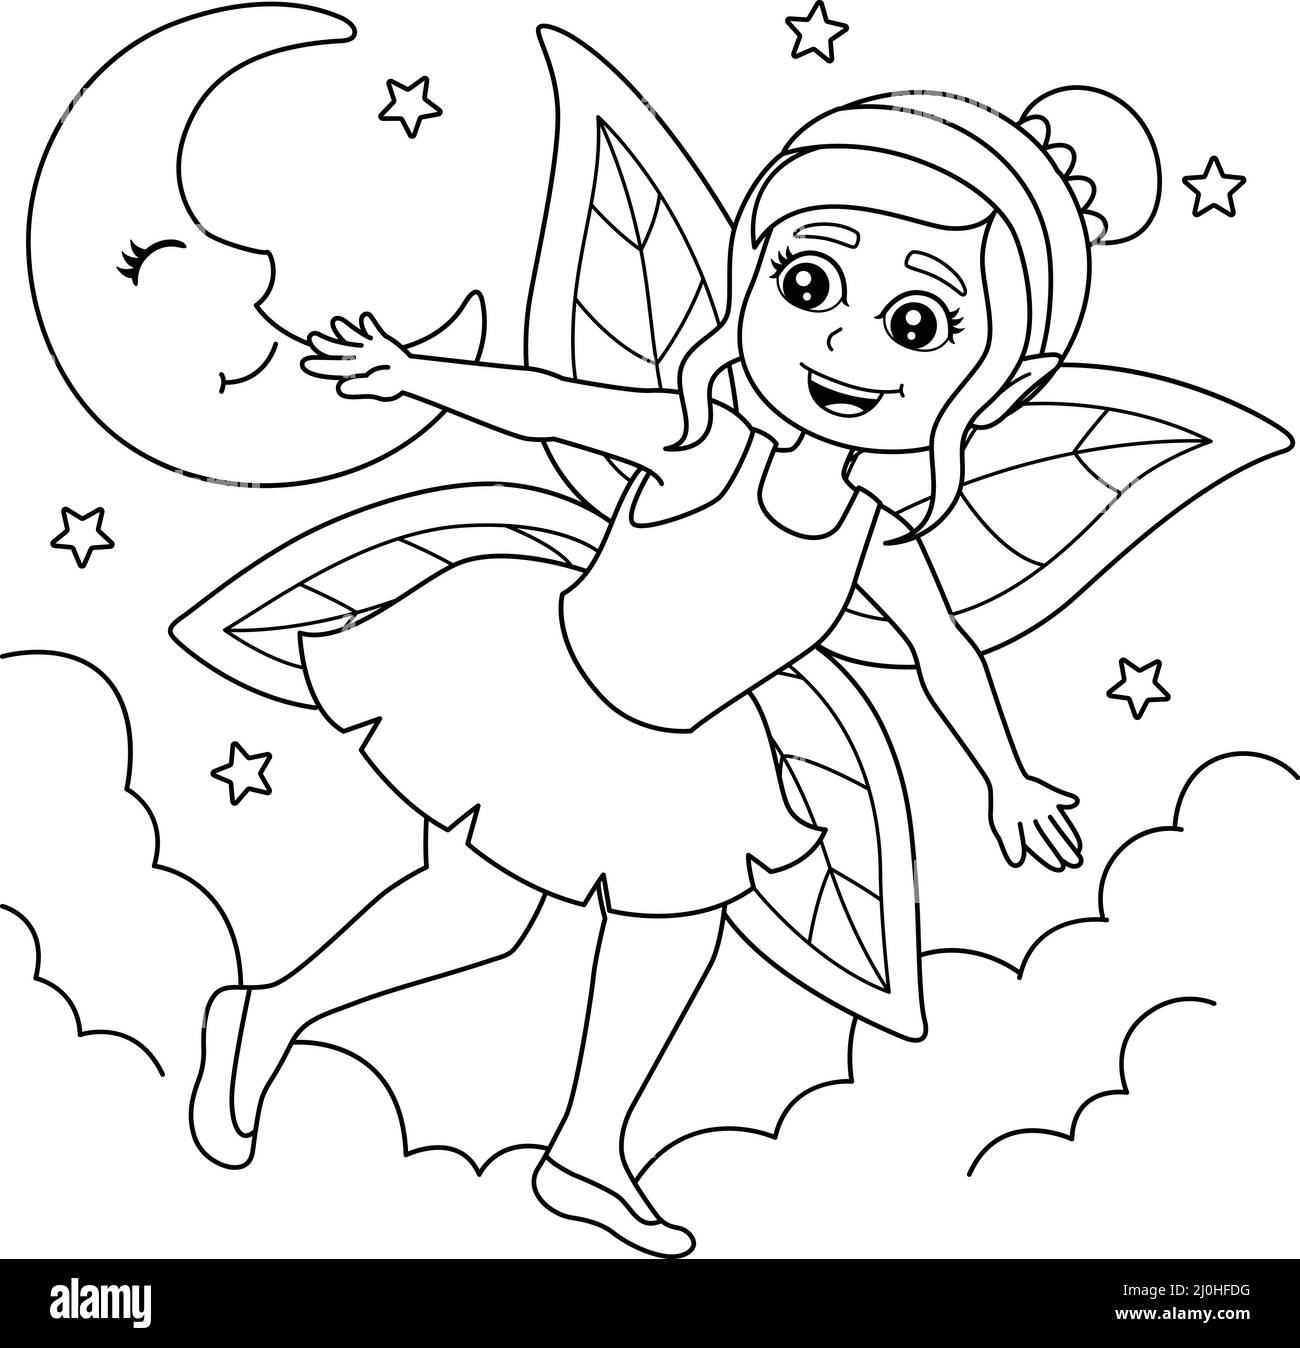 Flying Fairy Coloring Page for Kids Illustrazione Vettoriale